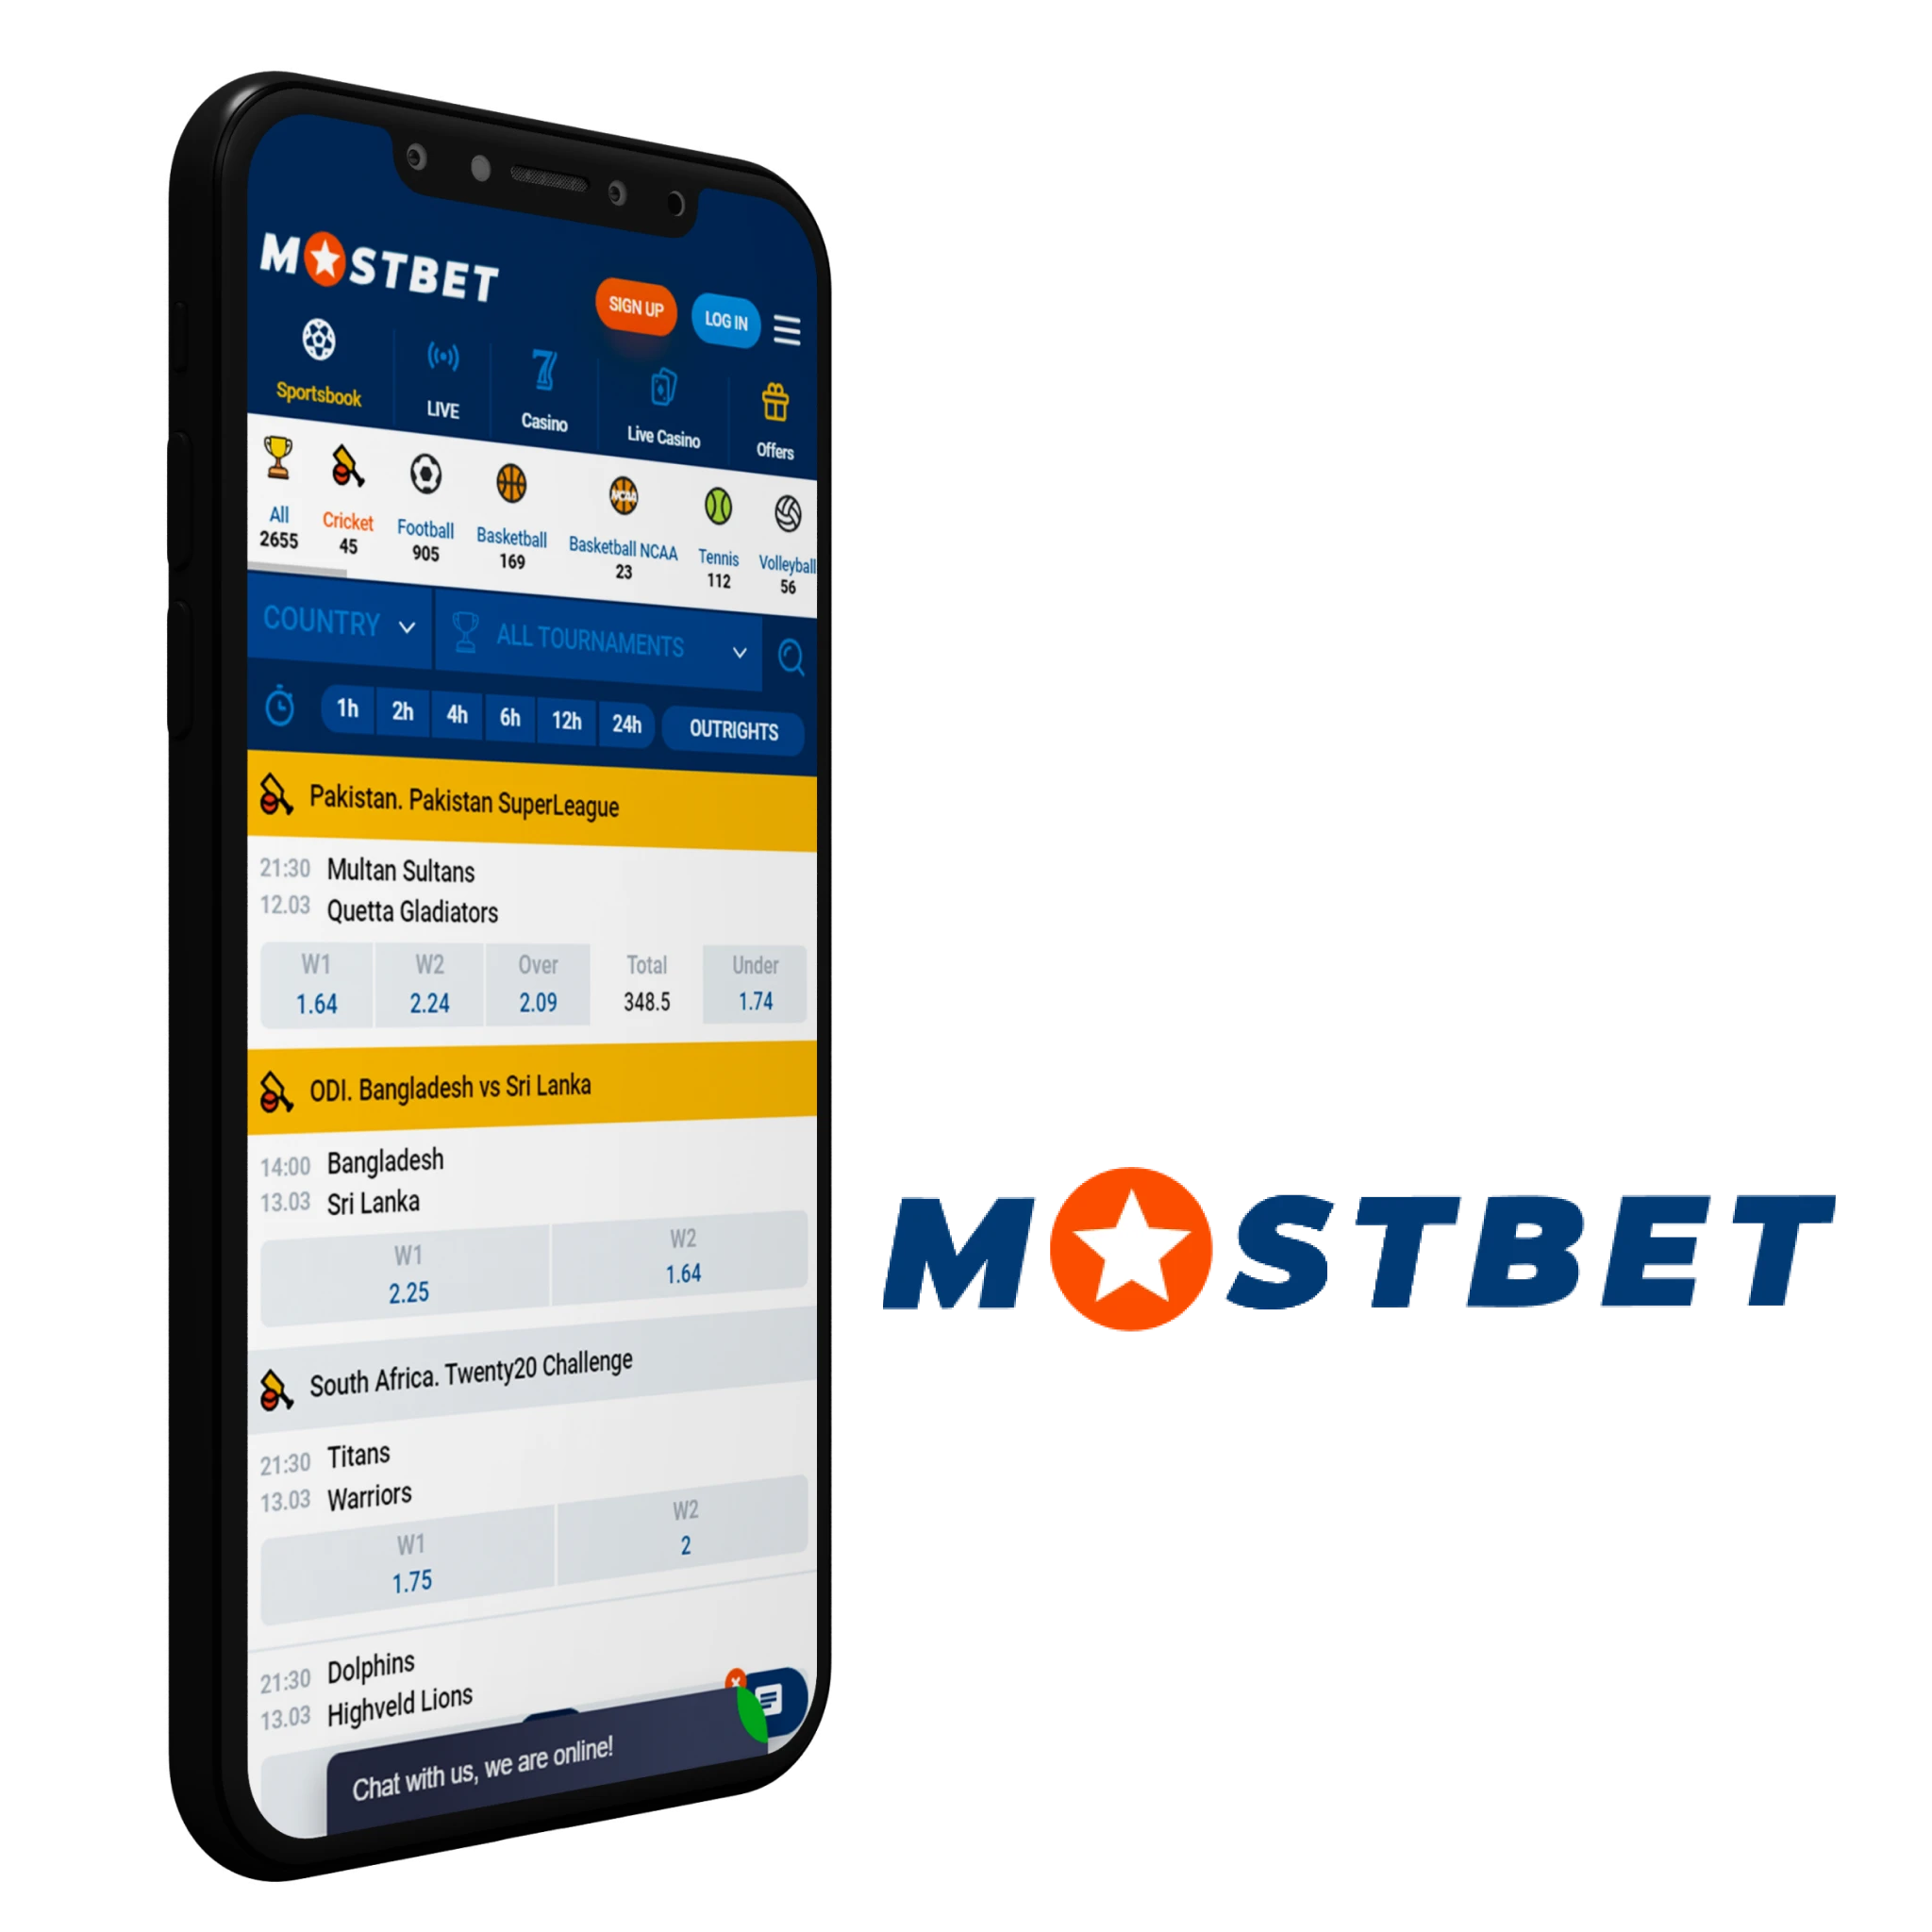 Place bets on cricket and play popular casino games in Mostbet mobile app.